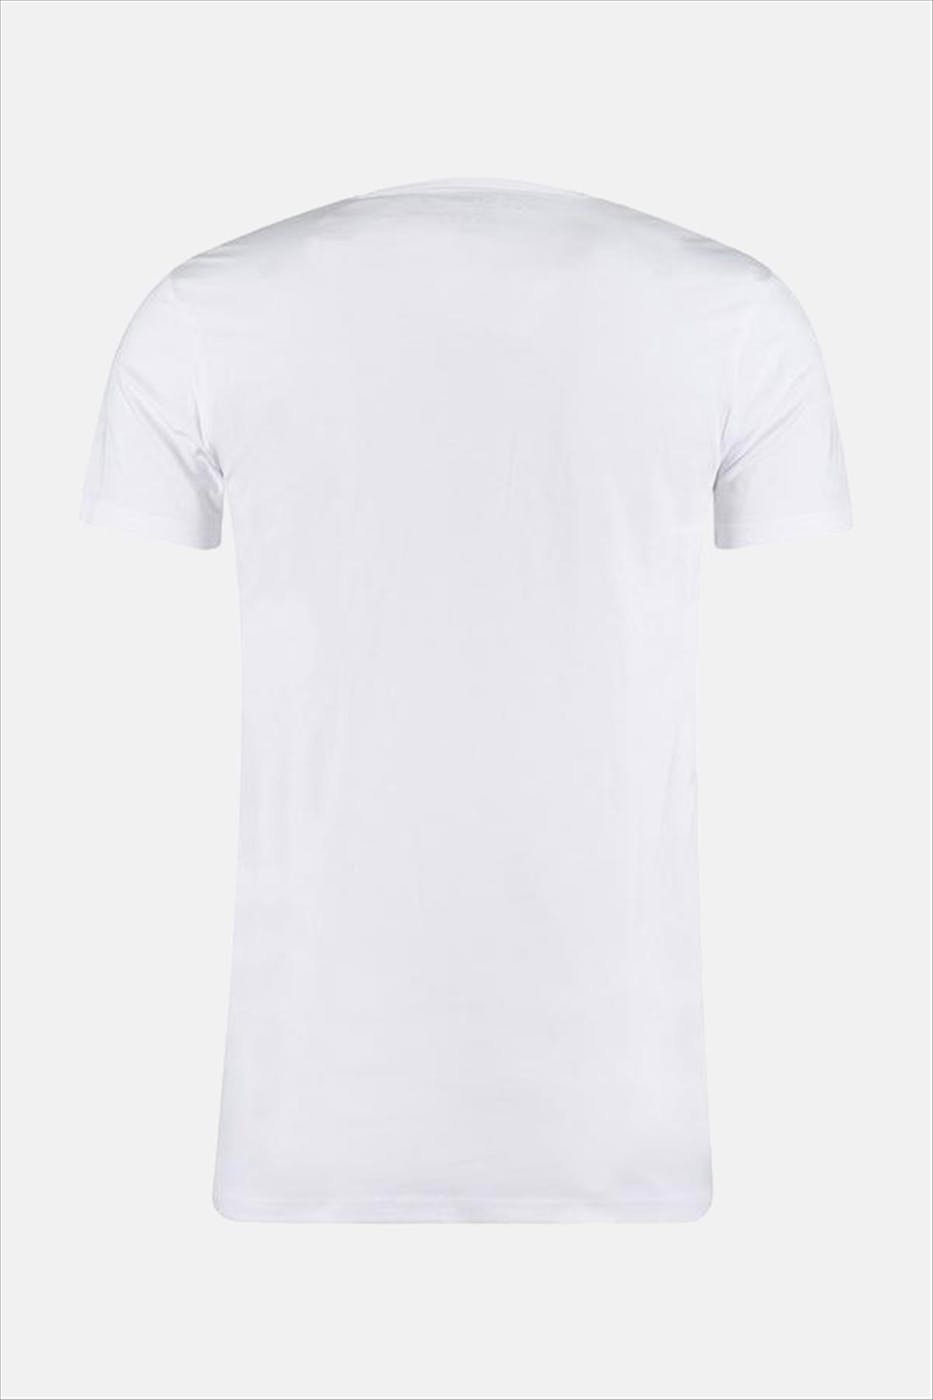 Garage - Witte 2-pack Body Fit O-Neck T-shirts